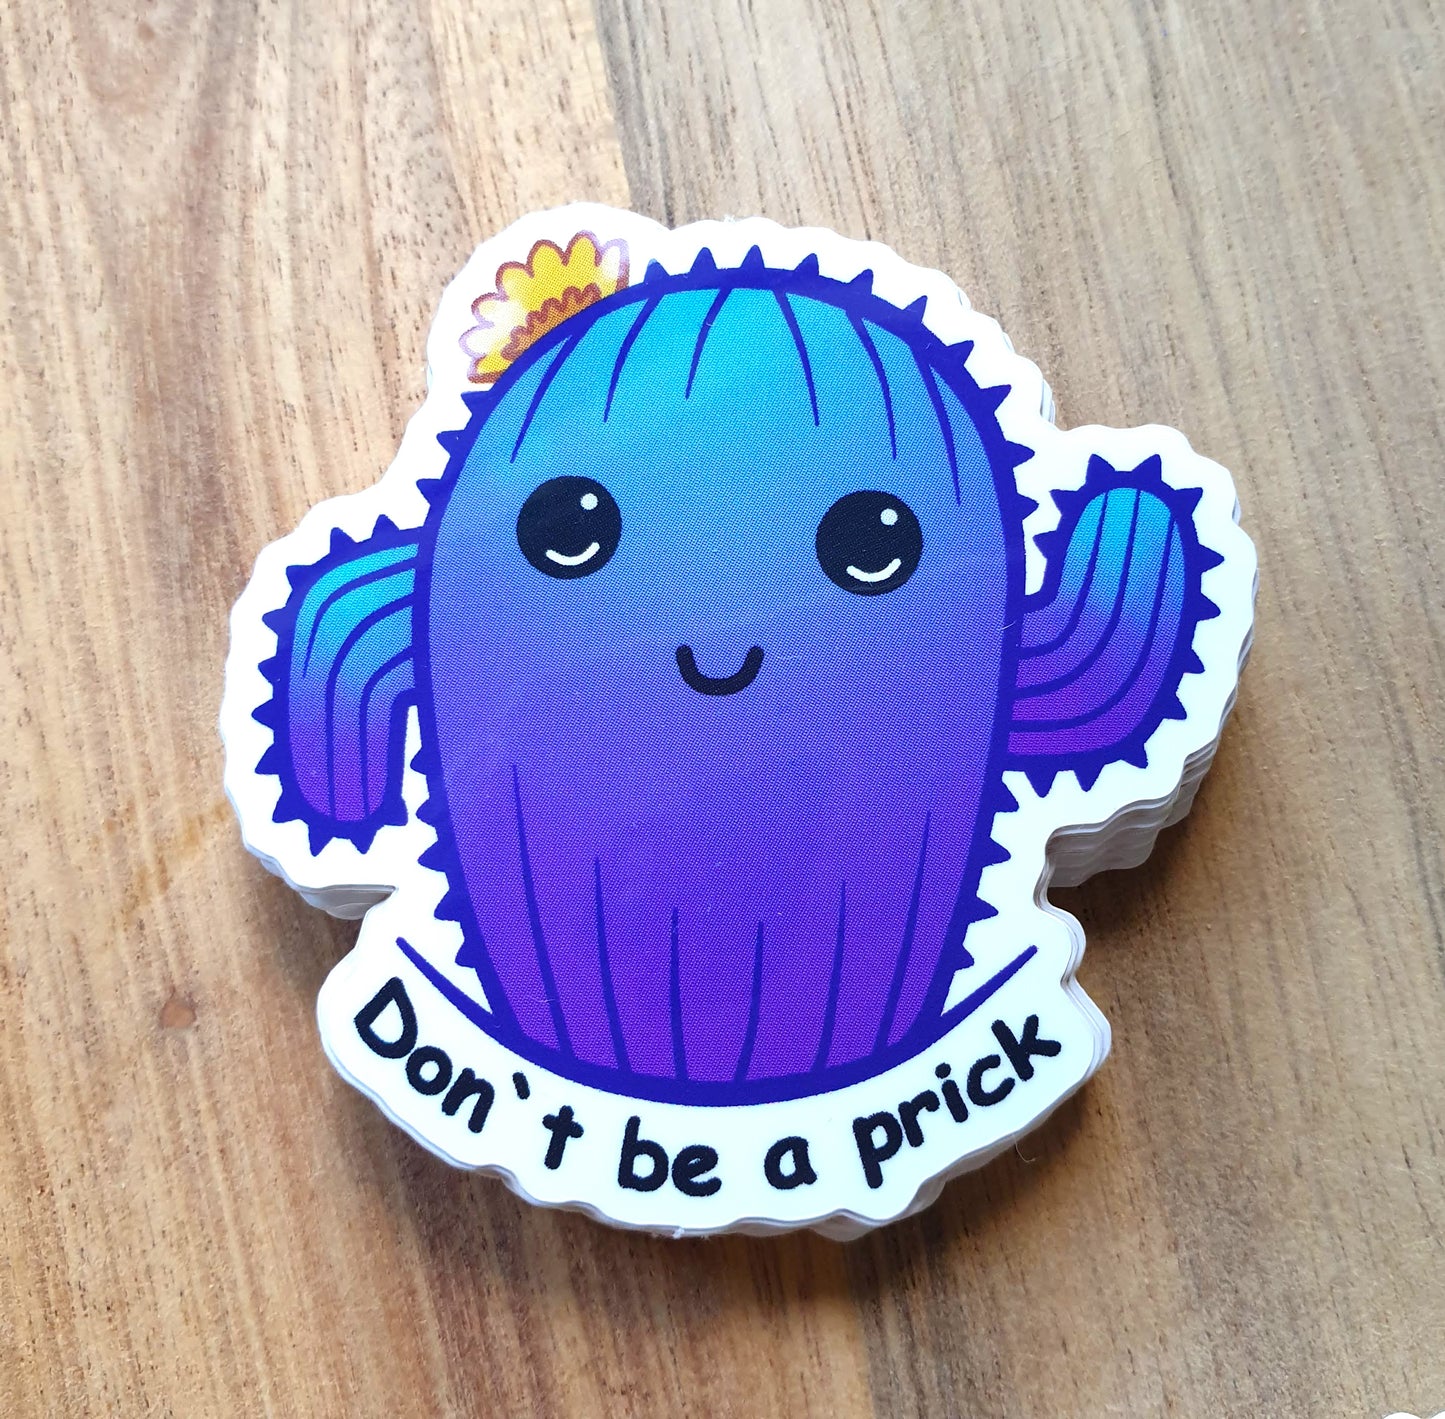 Cactus Sticker - "Don't be a prick" - blue and purple